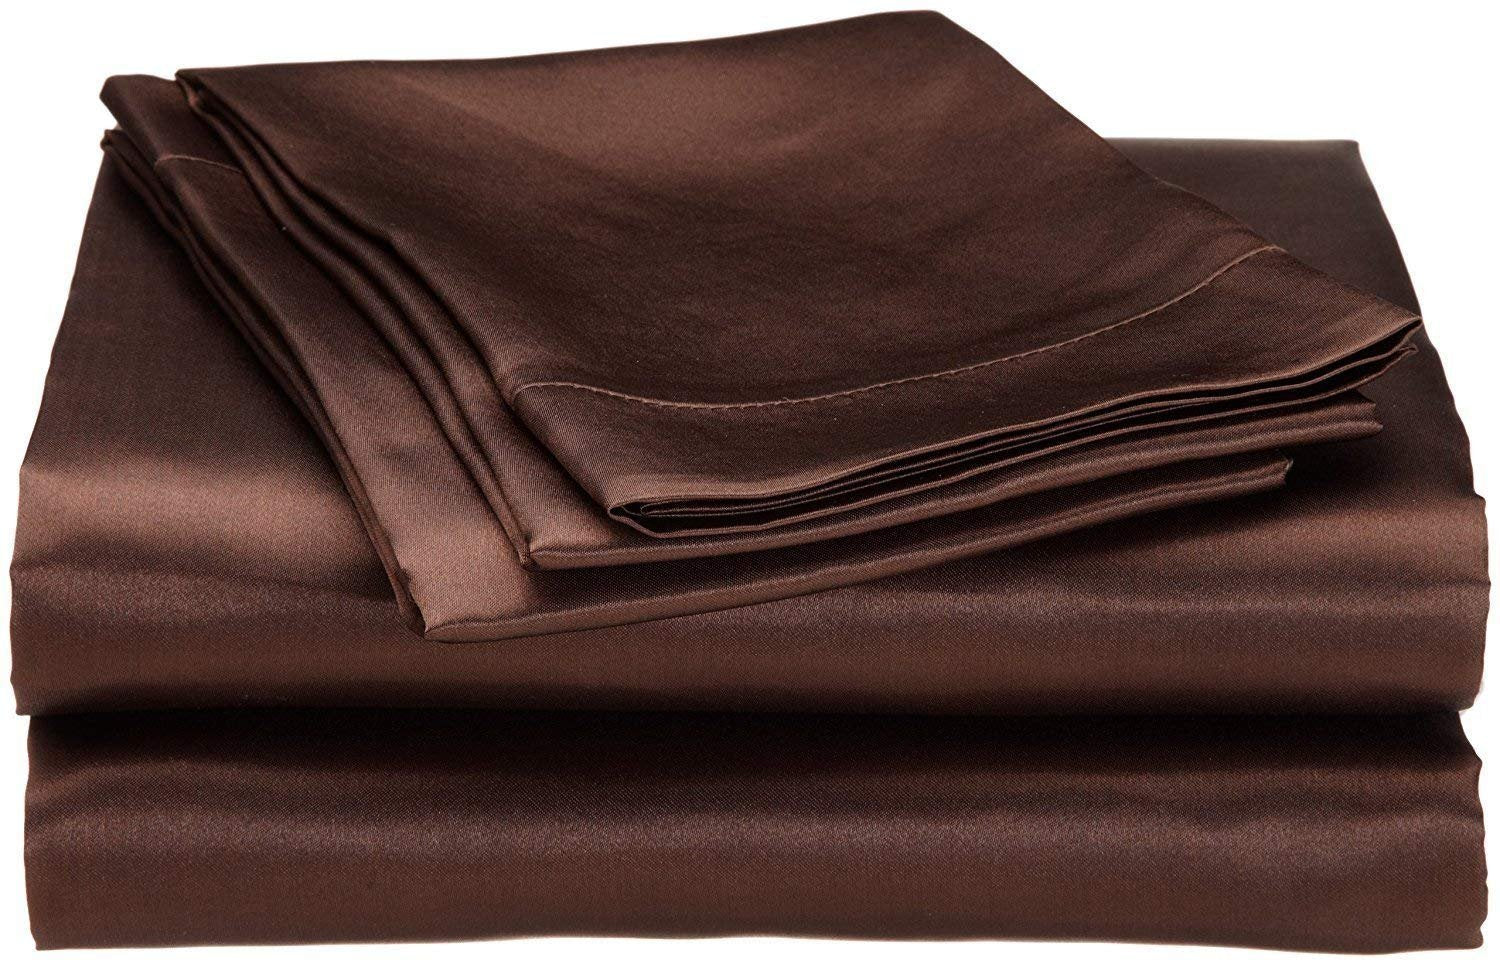 21 Inch Pocket Sheet Set Mulberry Sateen Silk Chocolate at-www.egyptianhomelinens.com